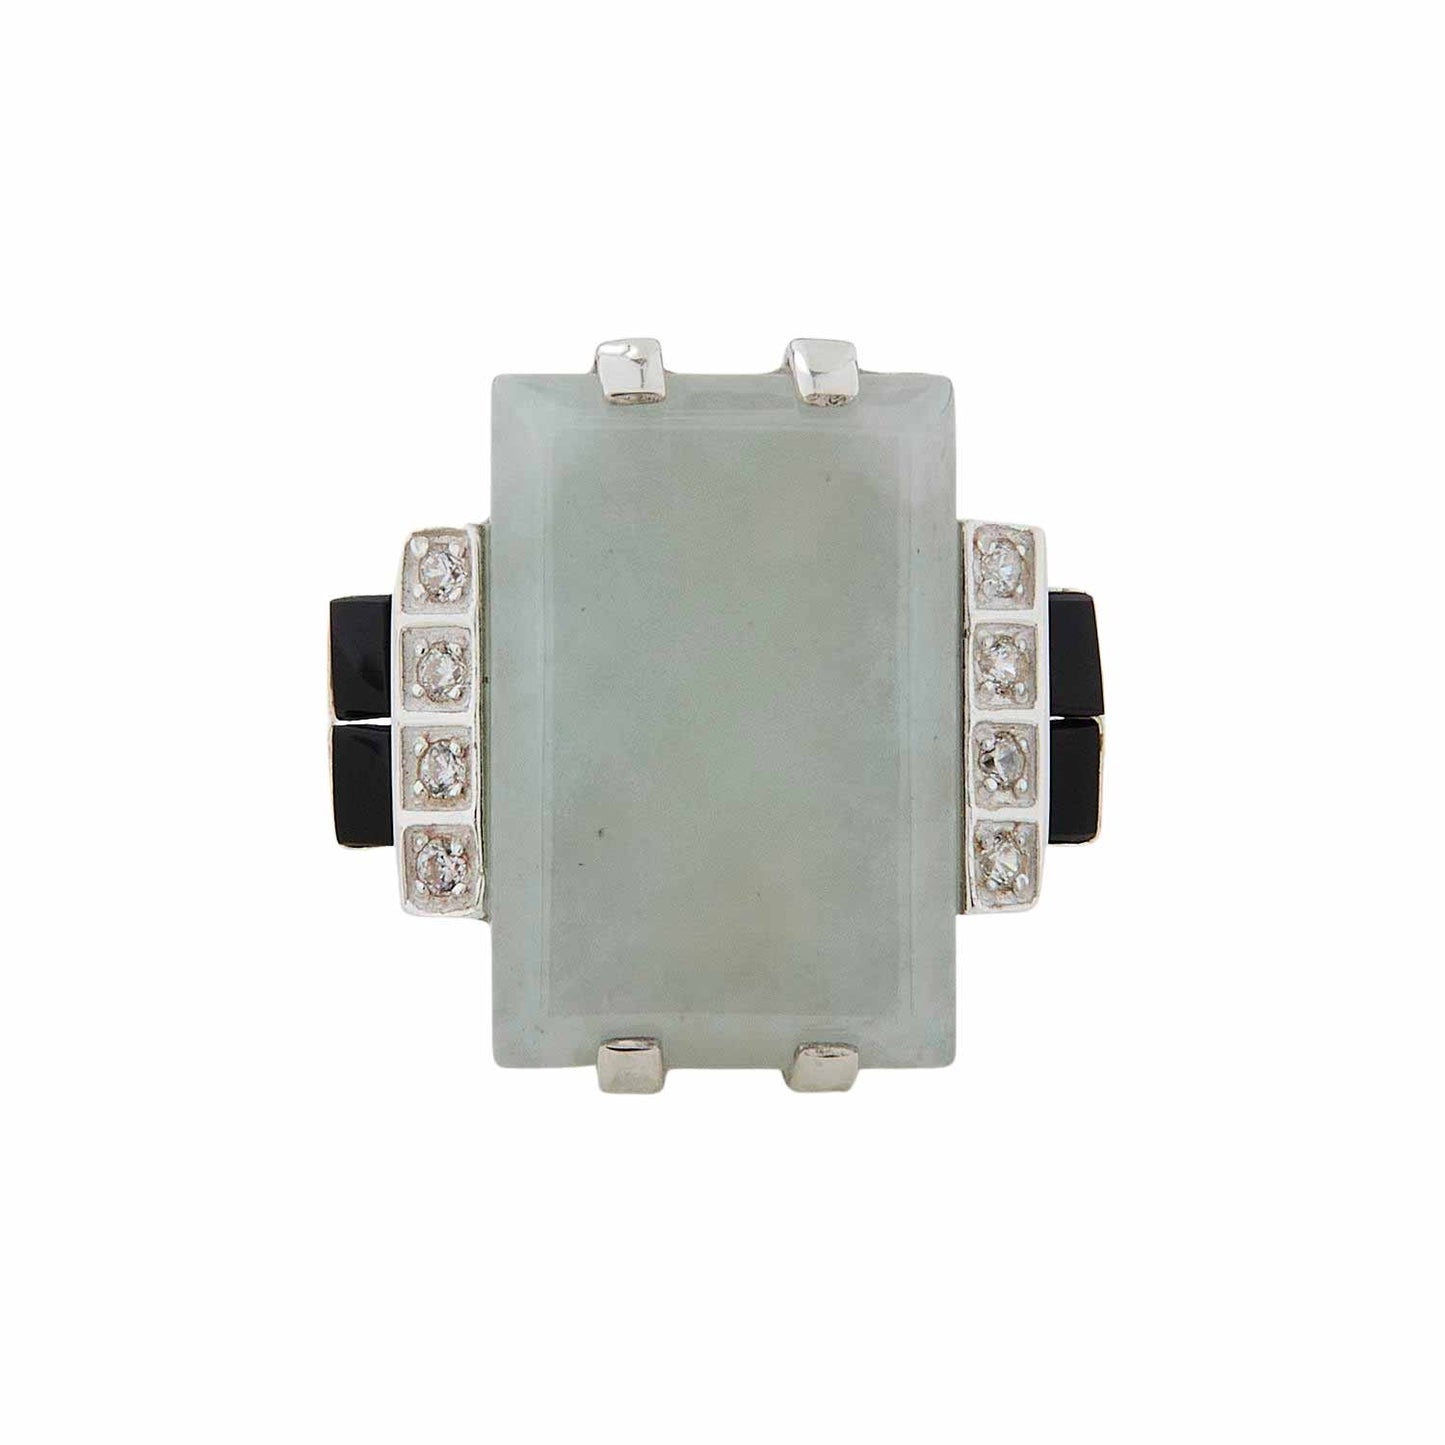 Art Deco Design Statement Cocktail Ring: Sterling Silver, Jade, Onyx, Cubic Zirconia